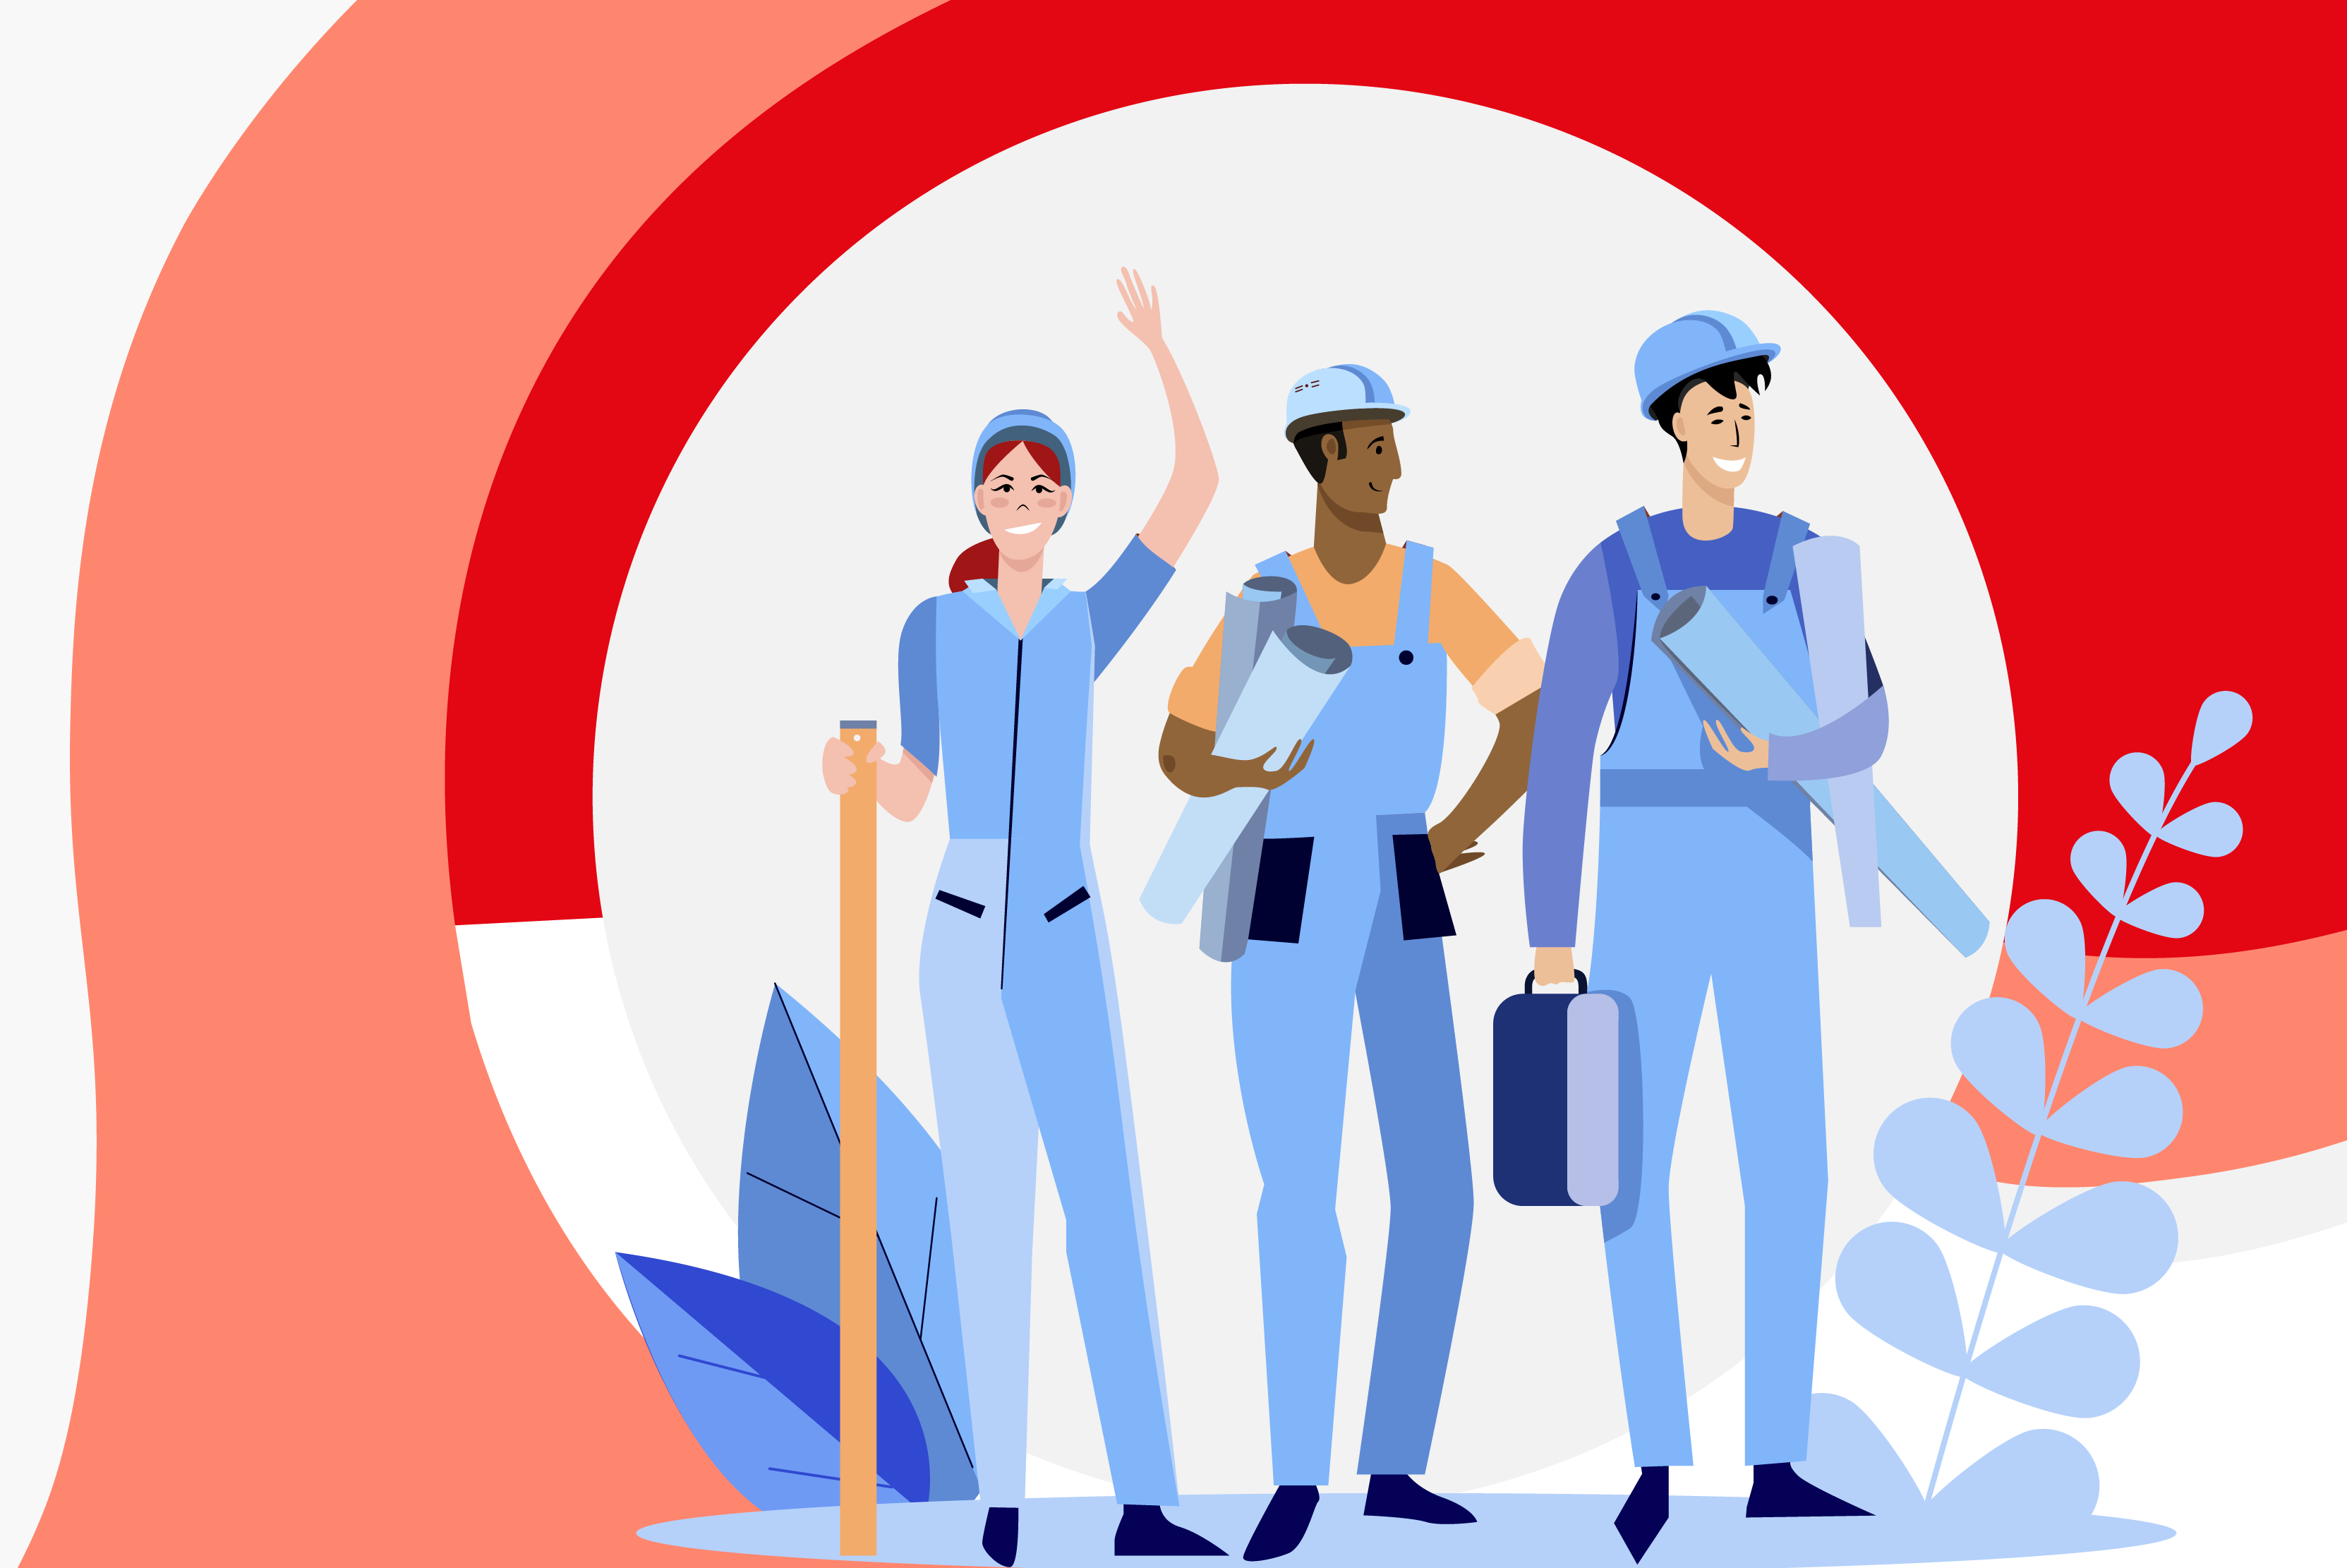 Illustration Comicstyle: One female worker and two male blue collar workers are waving with their hands